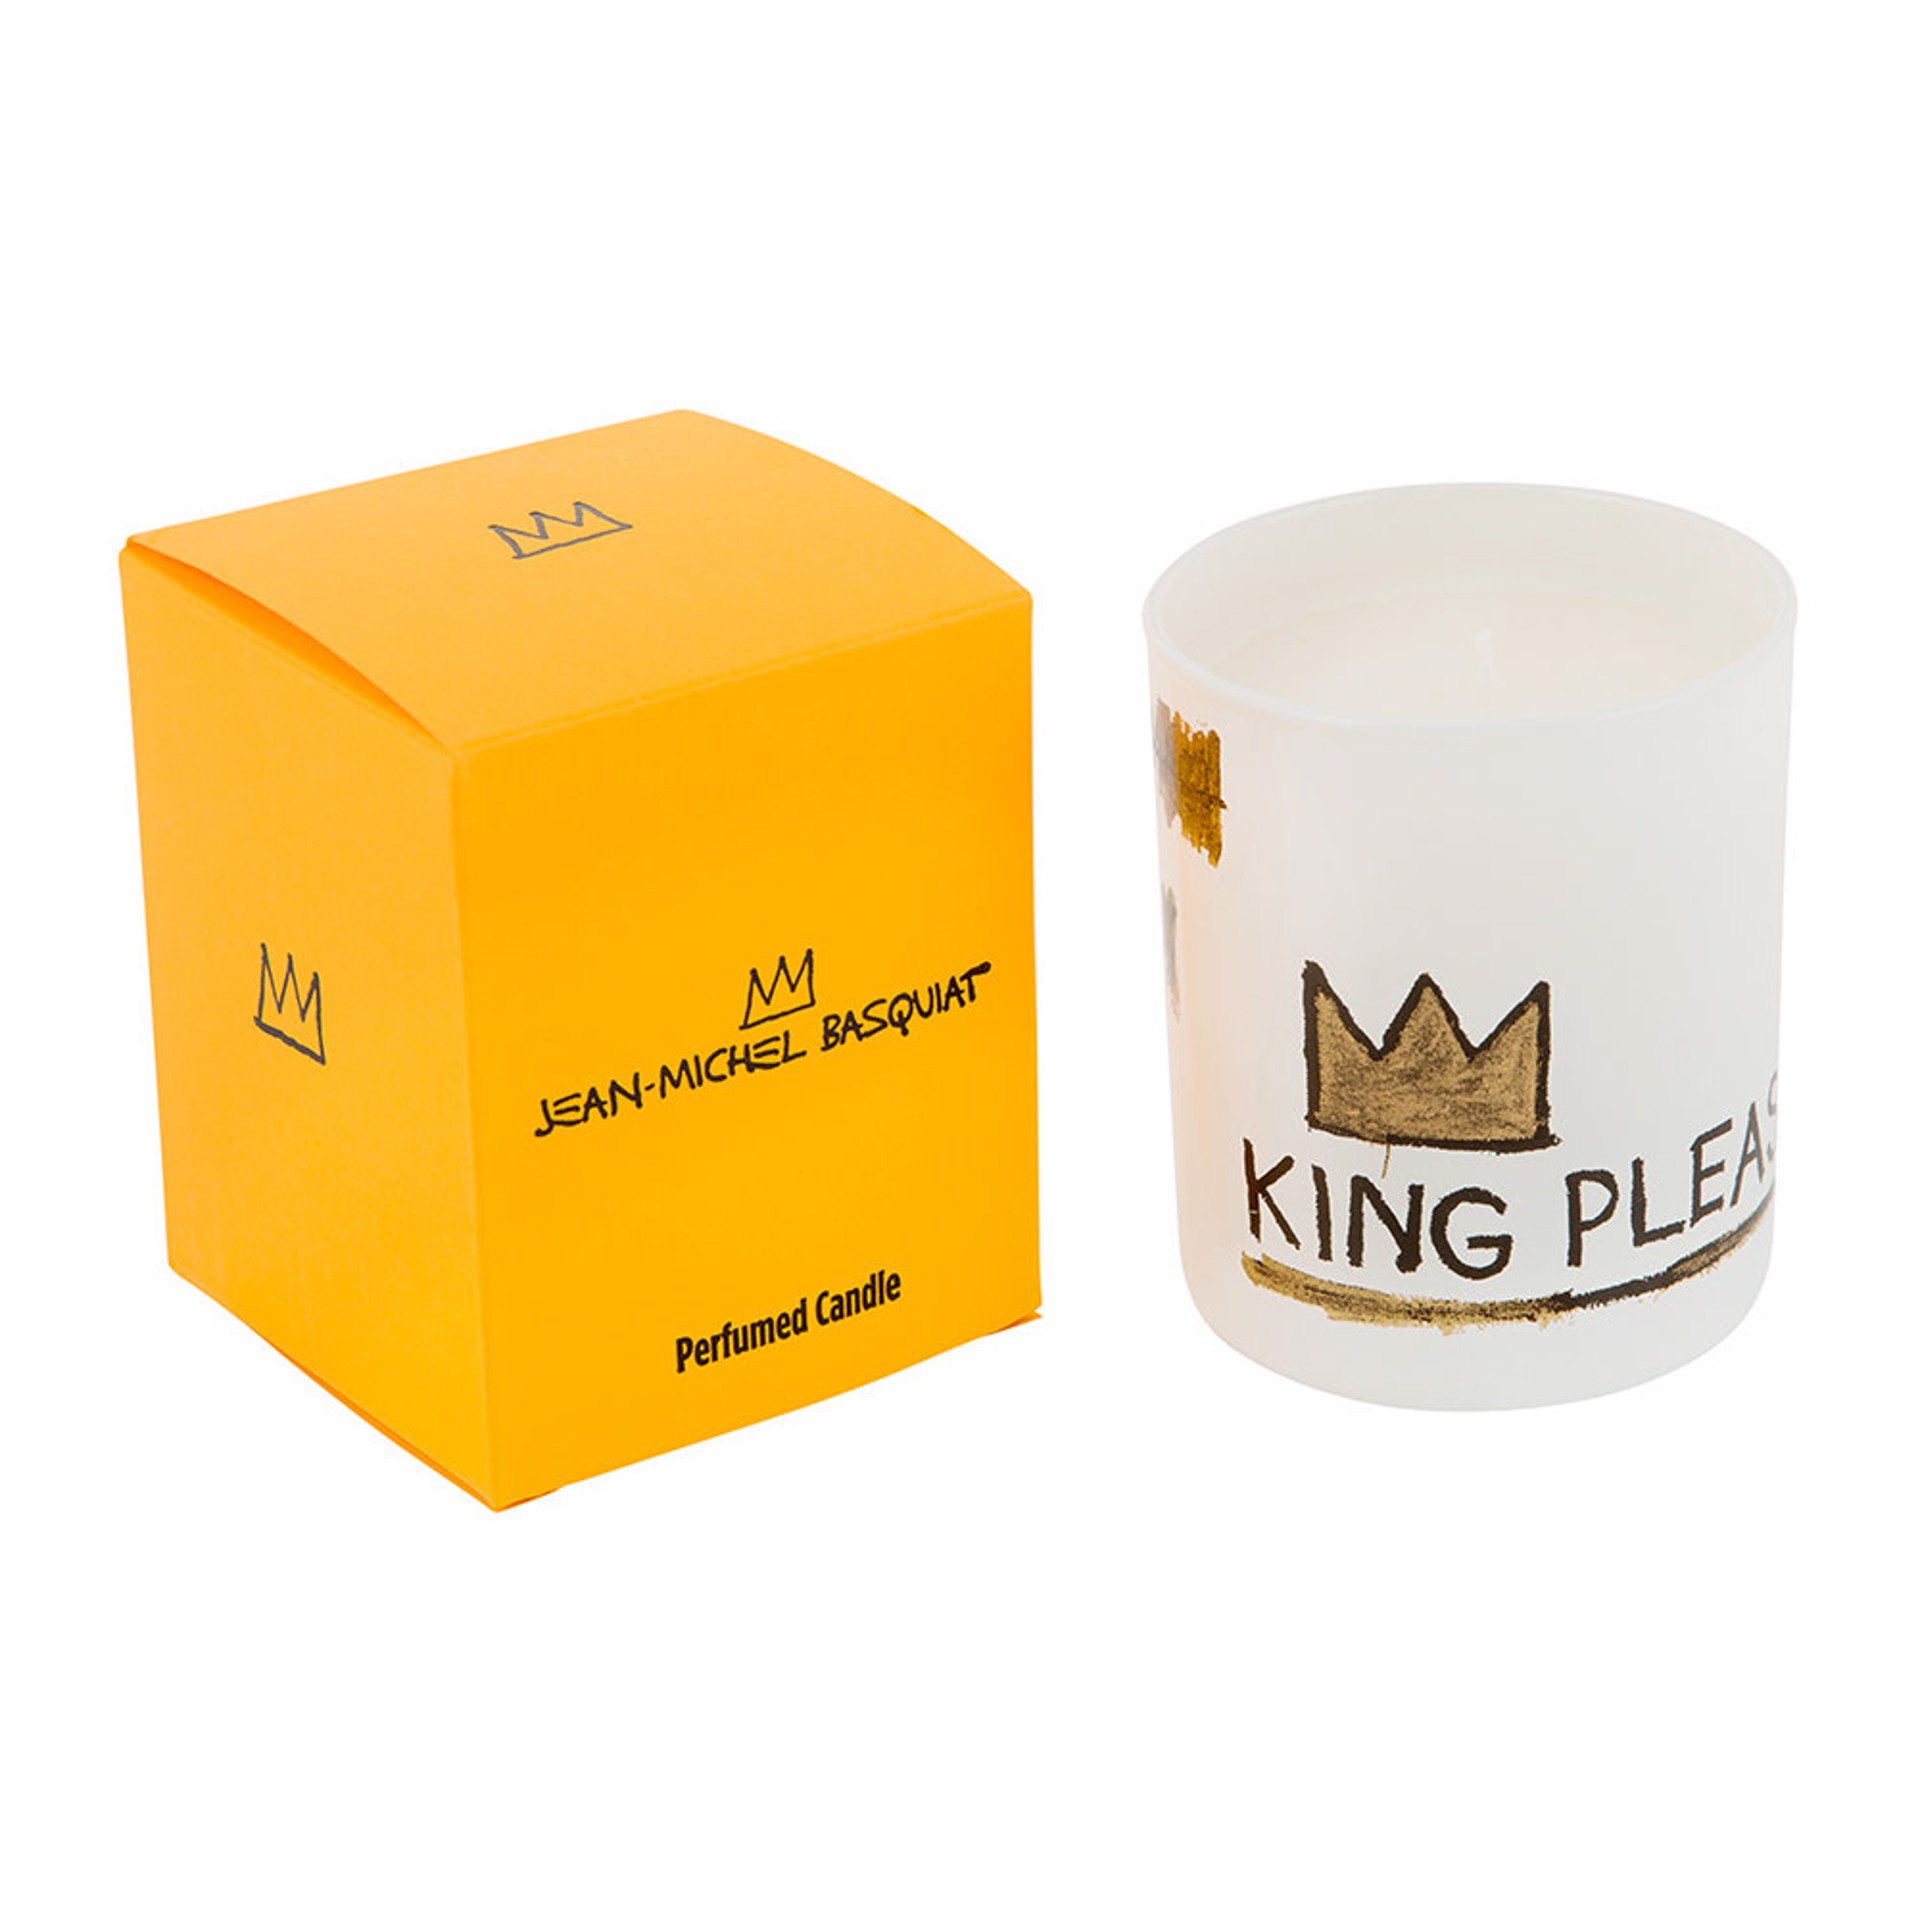 King Pleasure Scented Candle by Jean-Michel Basquiat